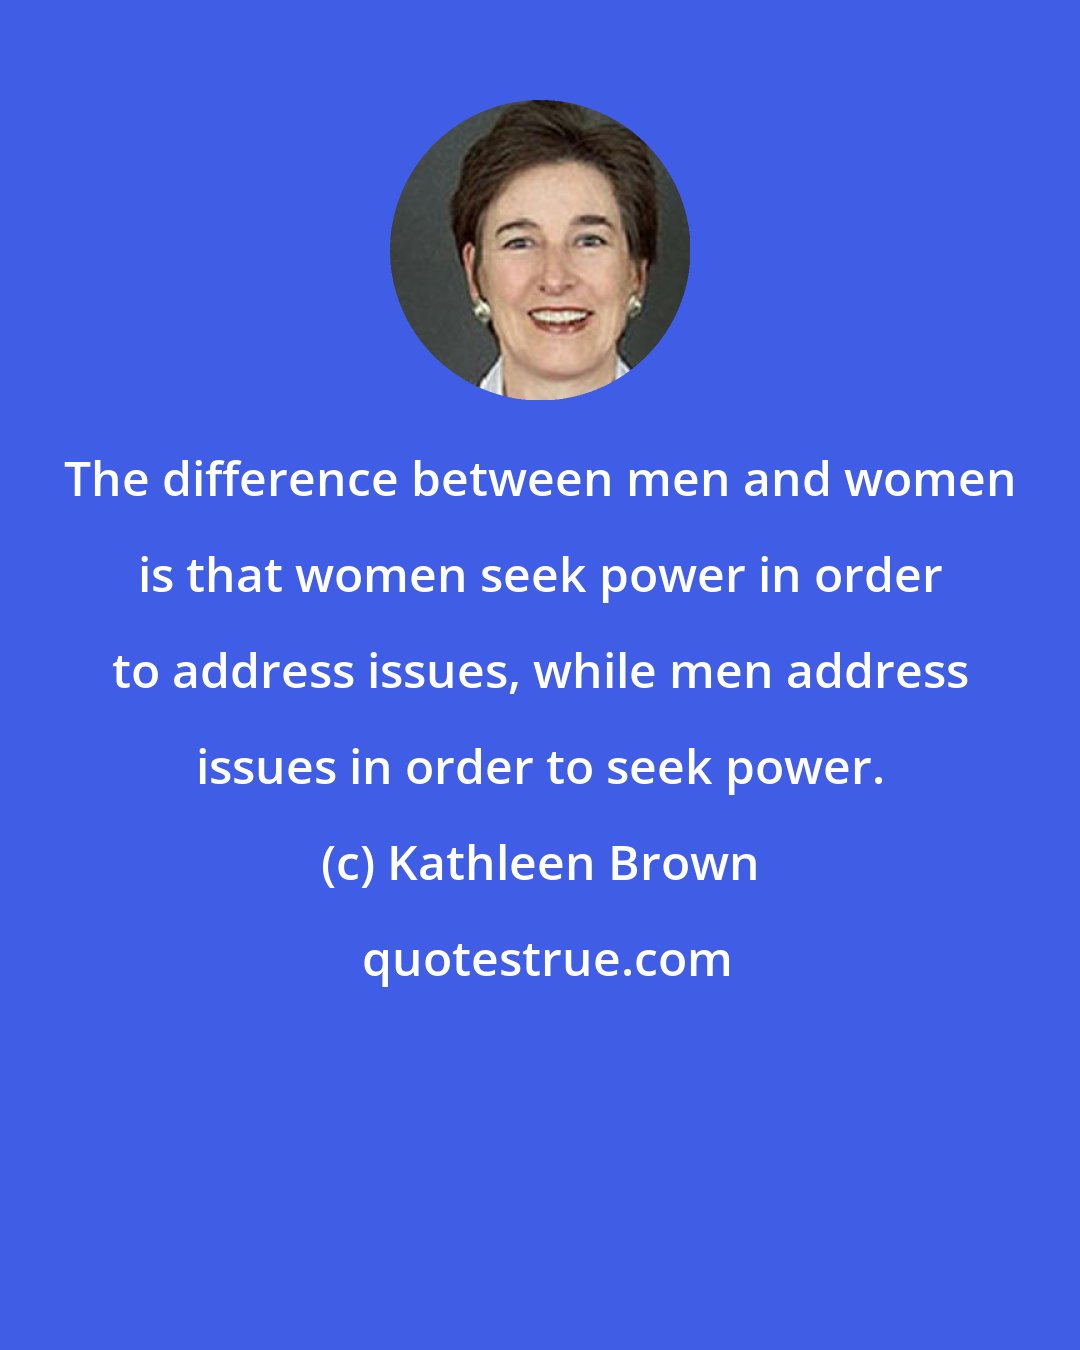 Kathleen Brown: The difference between men and women is that women seek power in order to address issues, while men address issues in order to seek power.